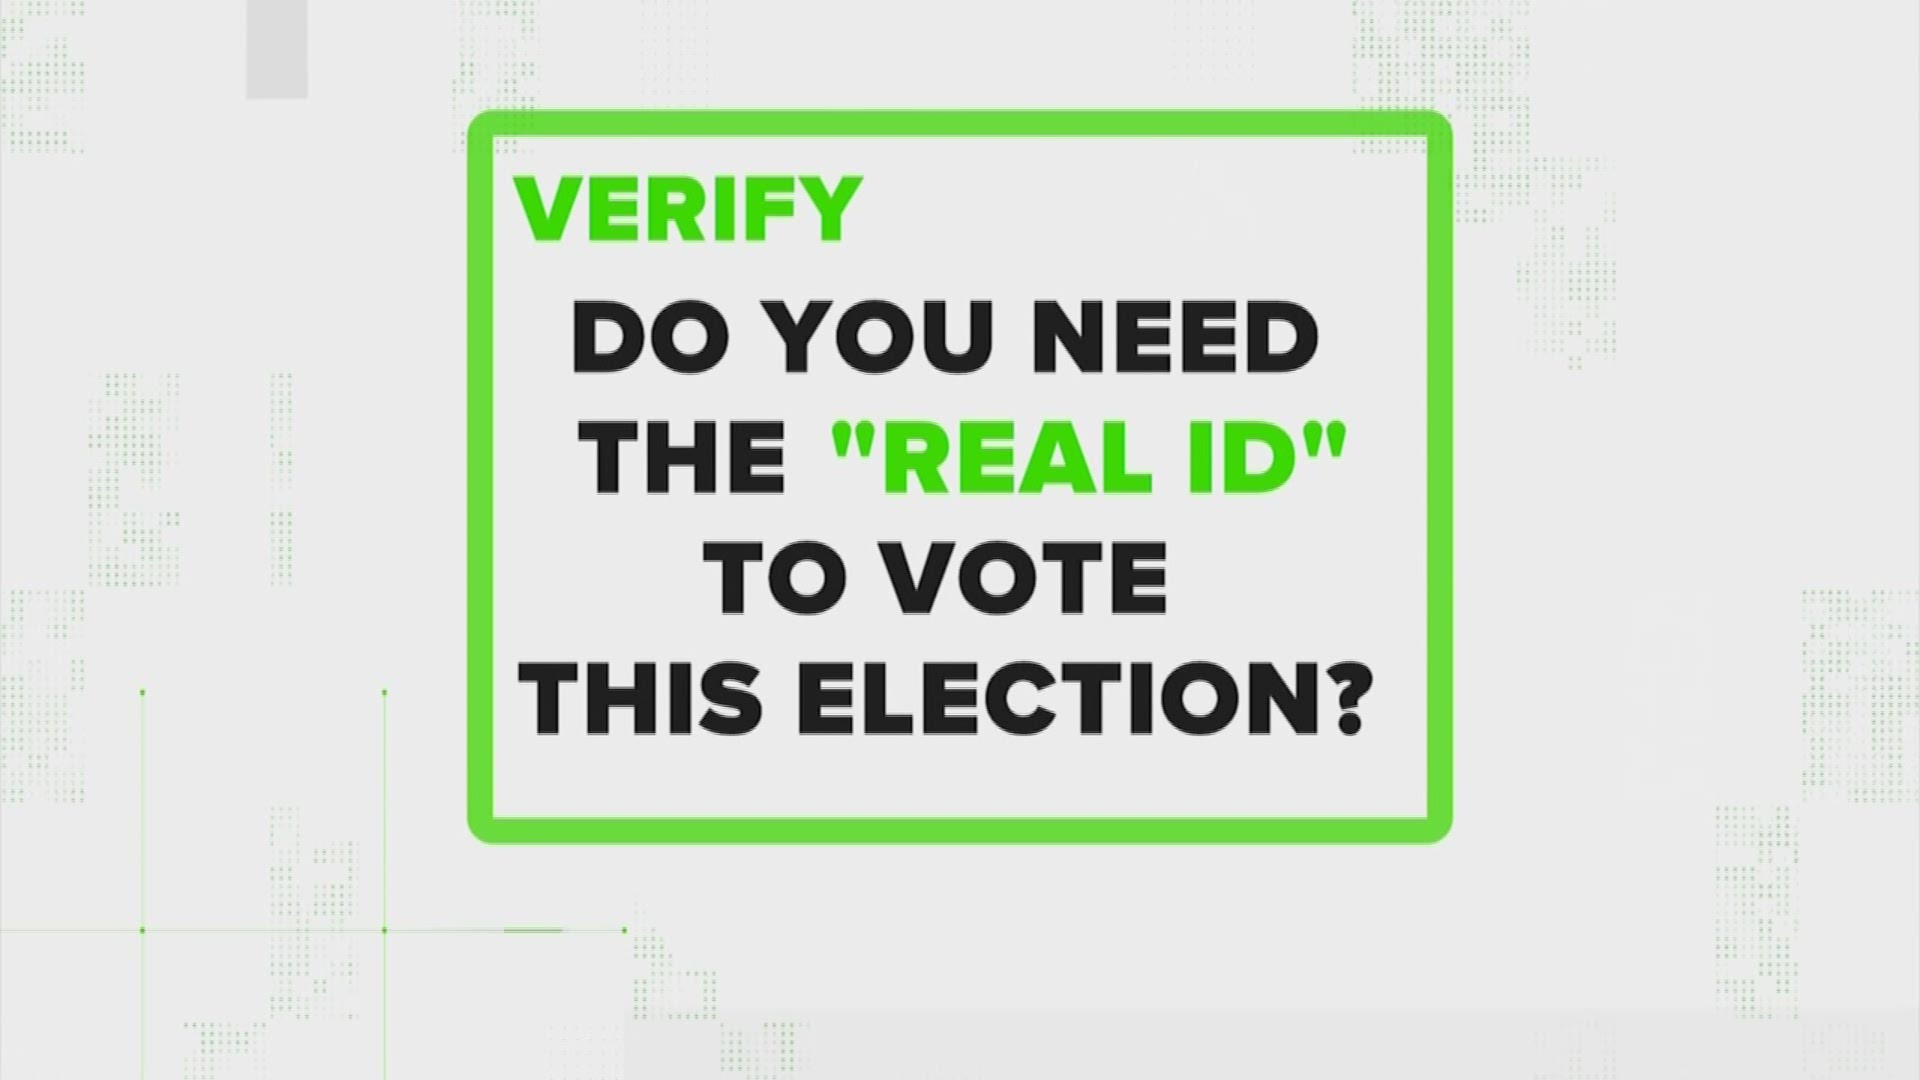 The topic of REAL ID's and voting requirements have once again triggered a great deal of misinformation online.